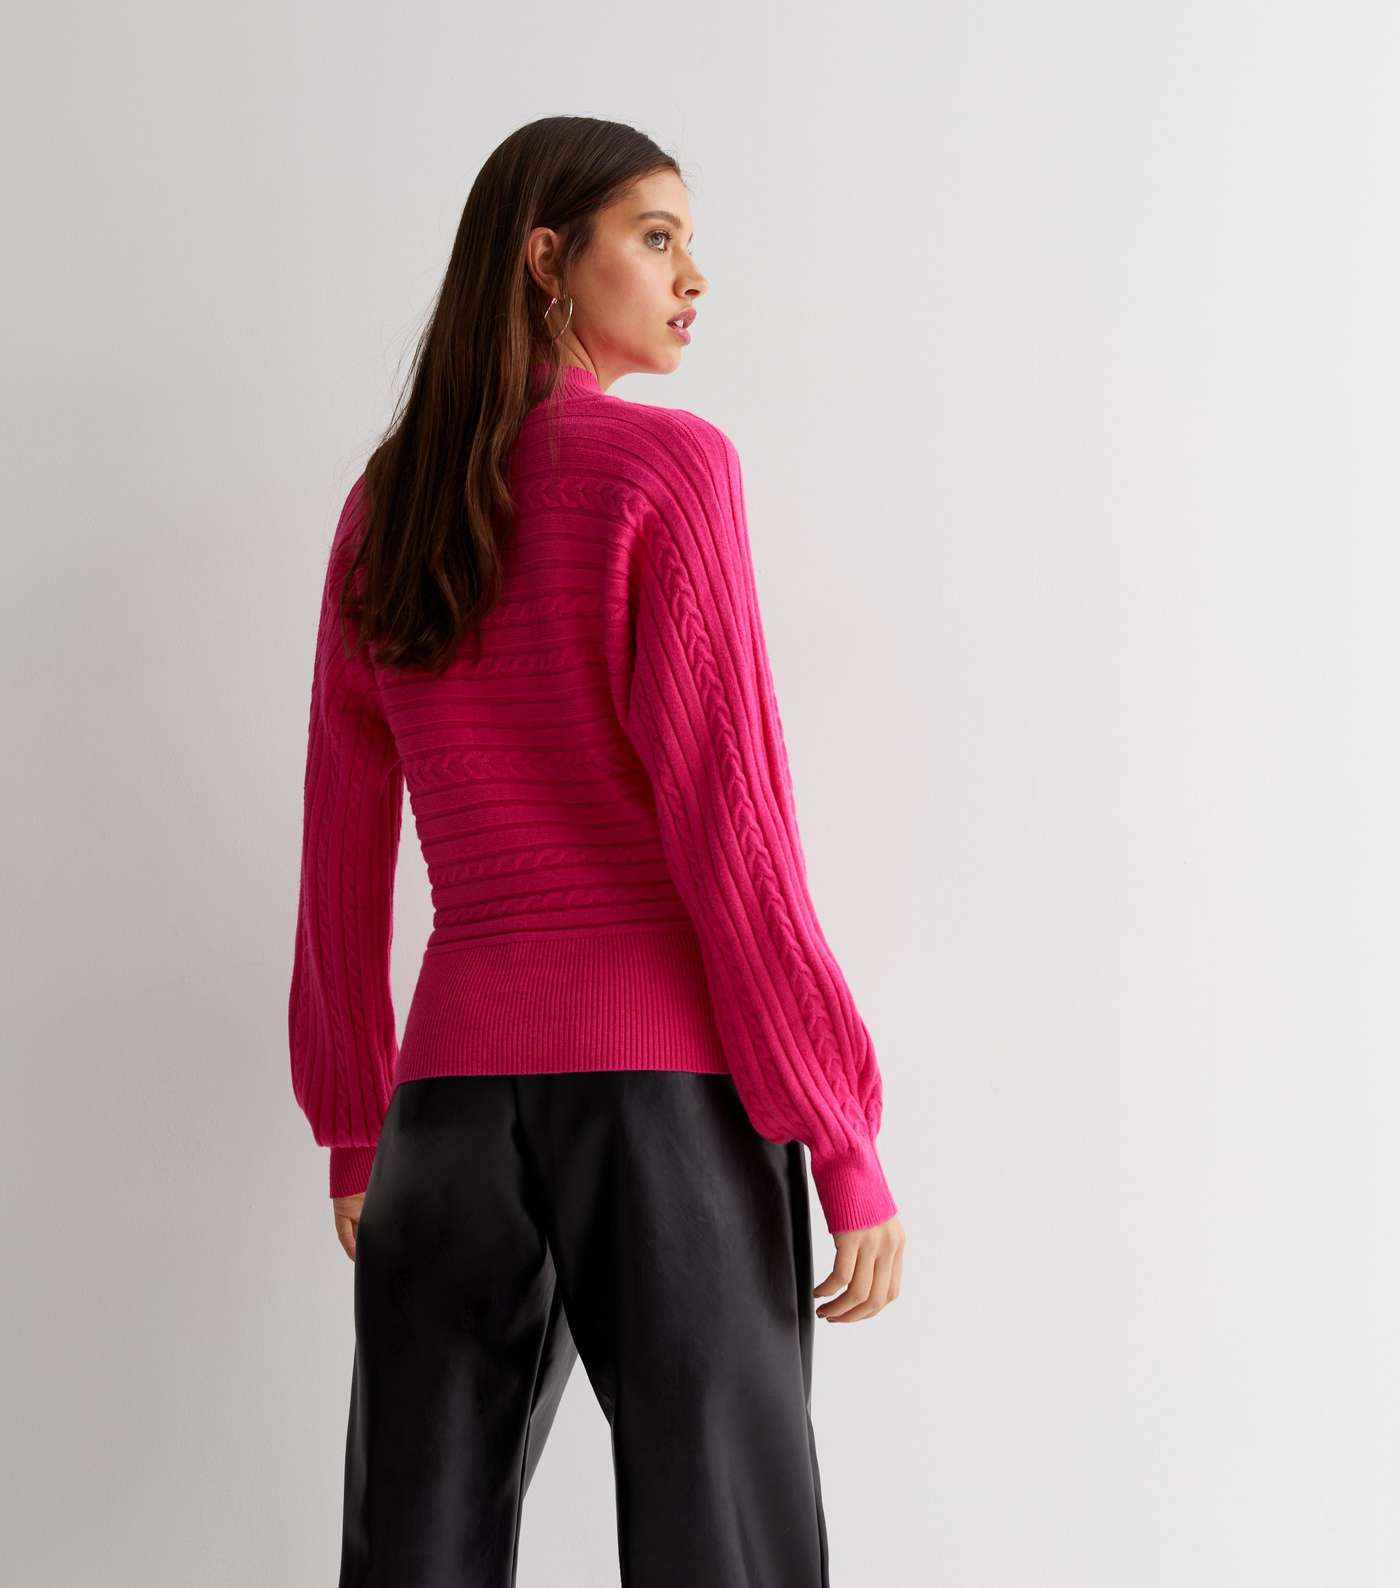 Sunshine Soul Bright Pink Cable Knit Batwing Jumper Image 4